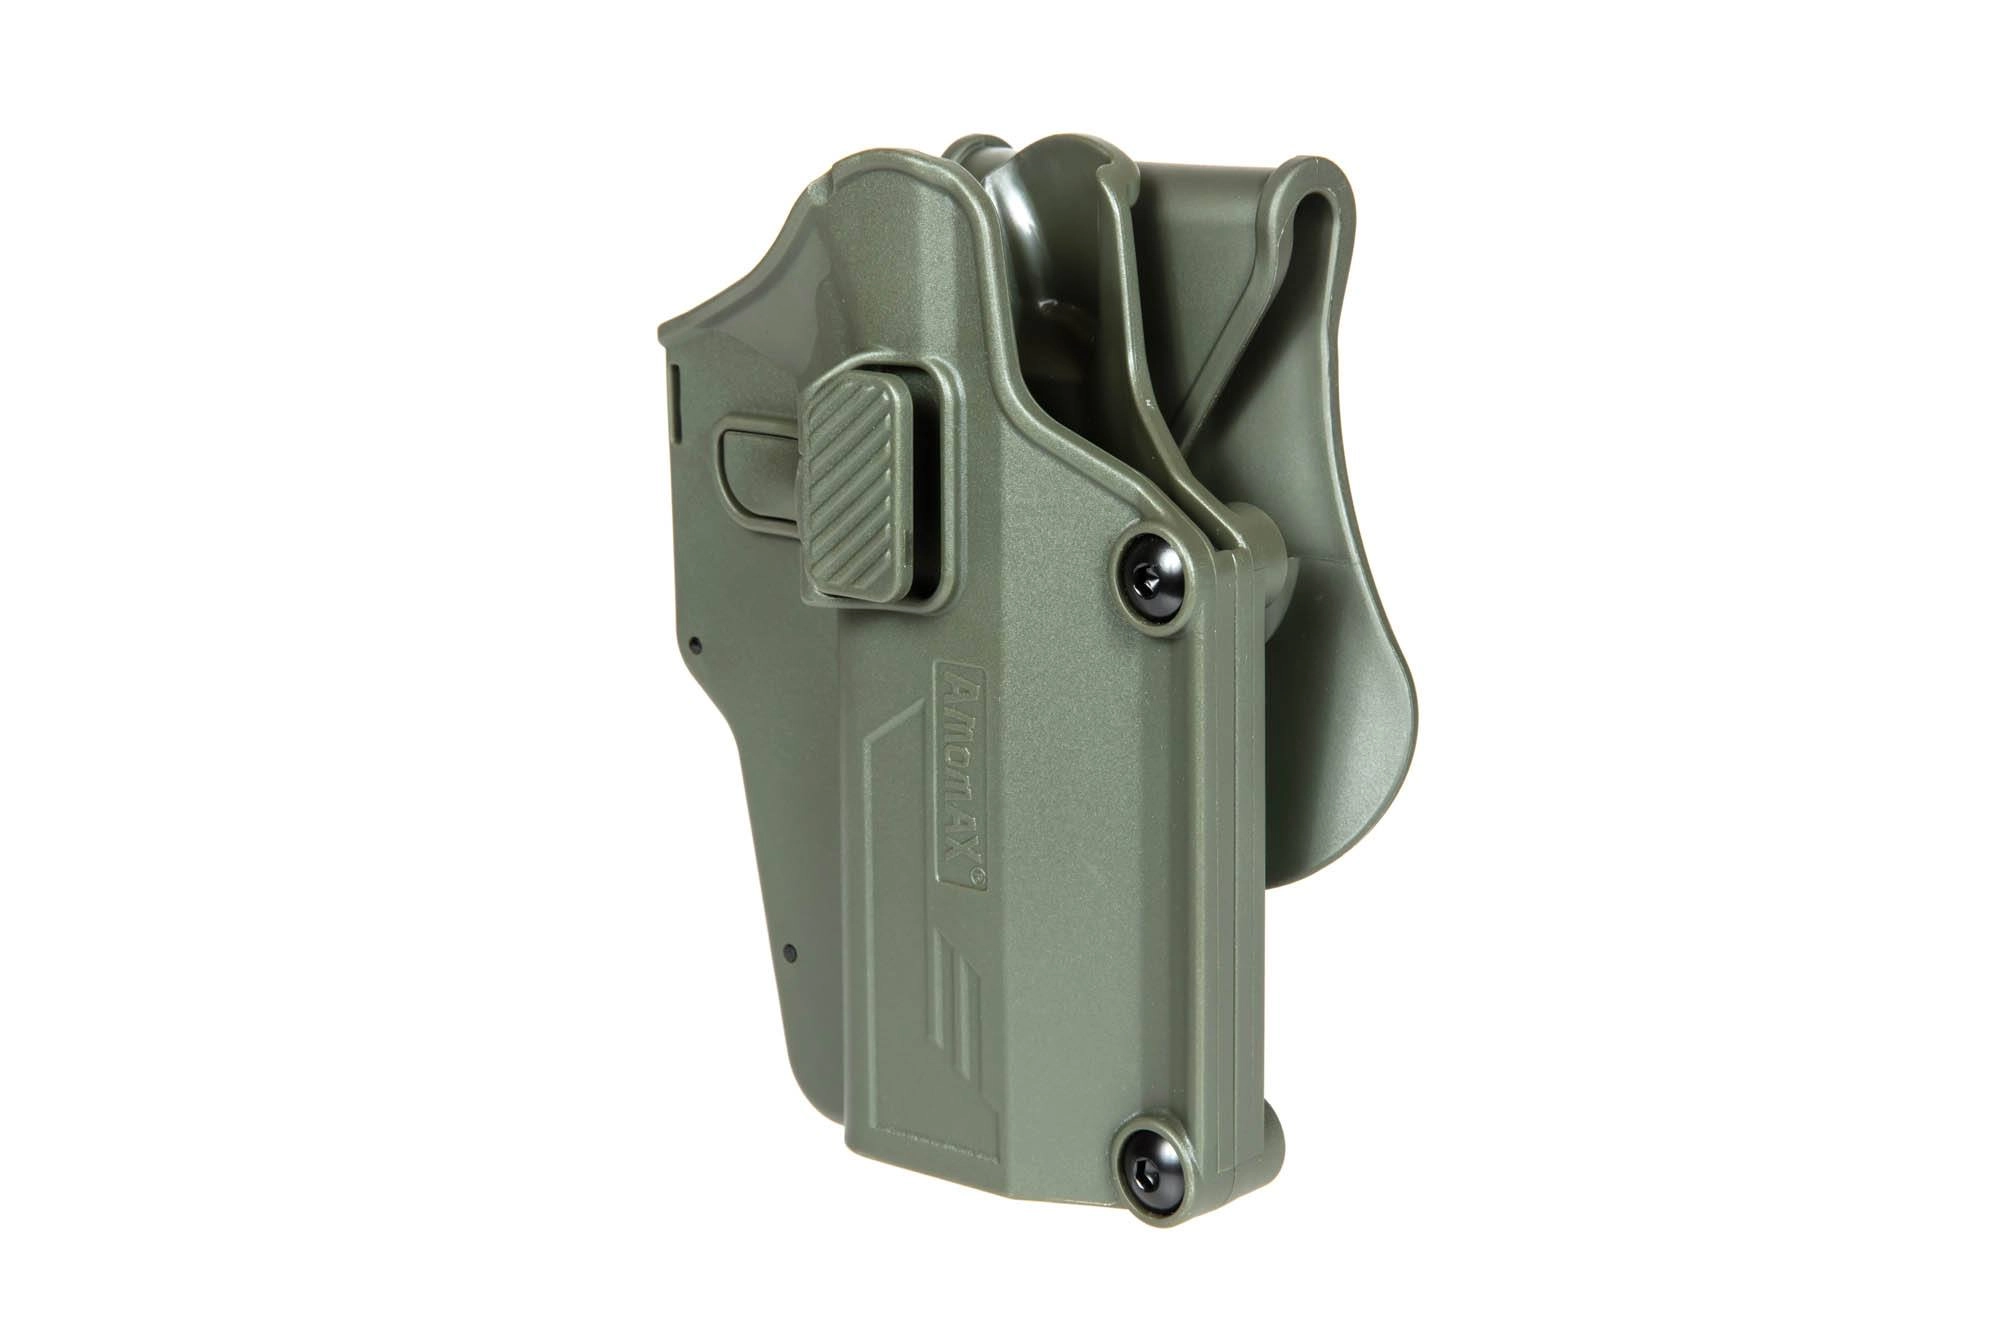  Per-Fit™ universal holster - OD